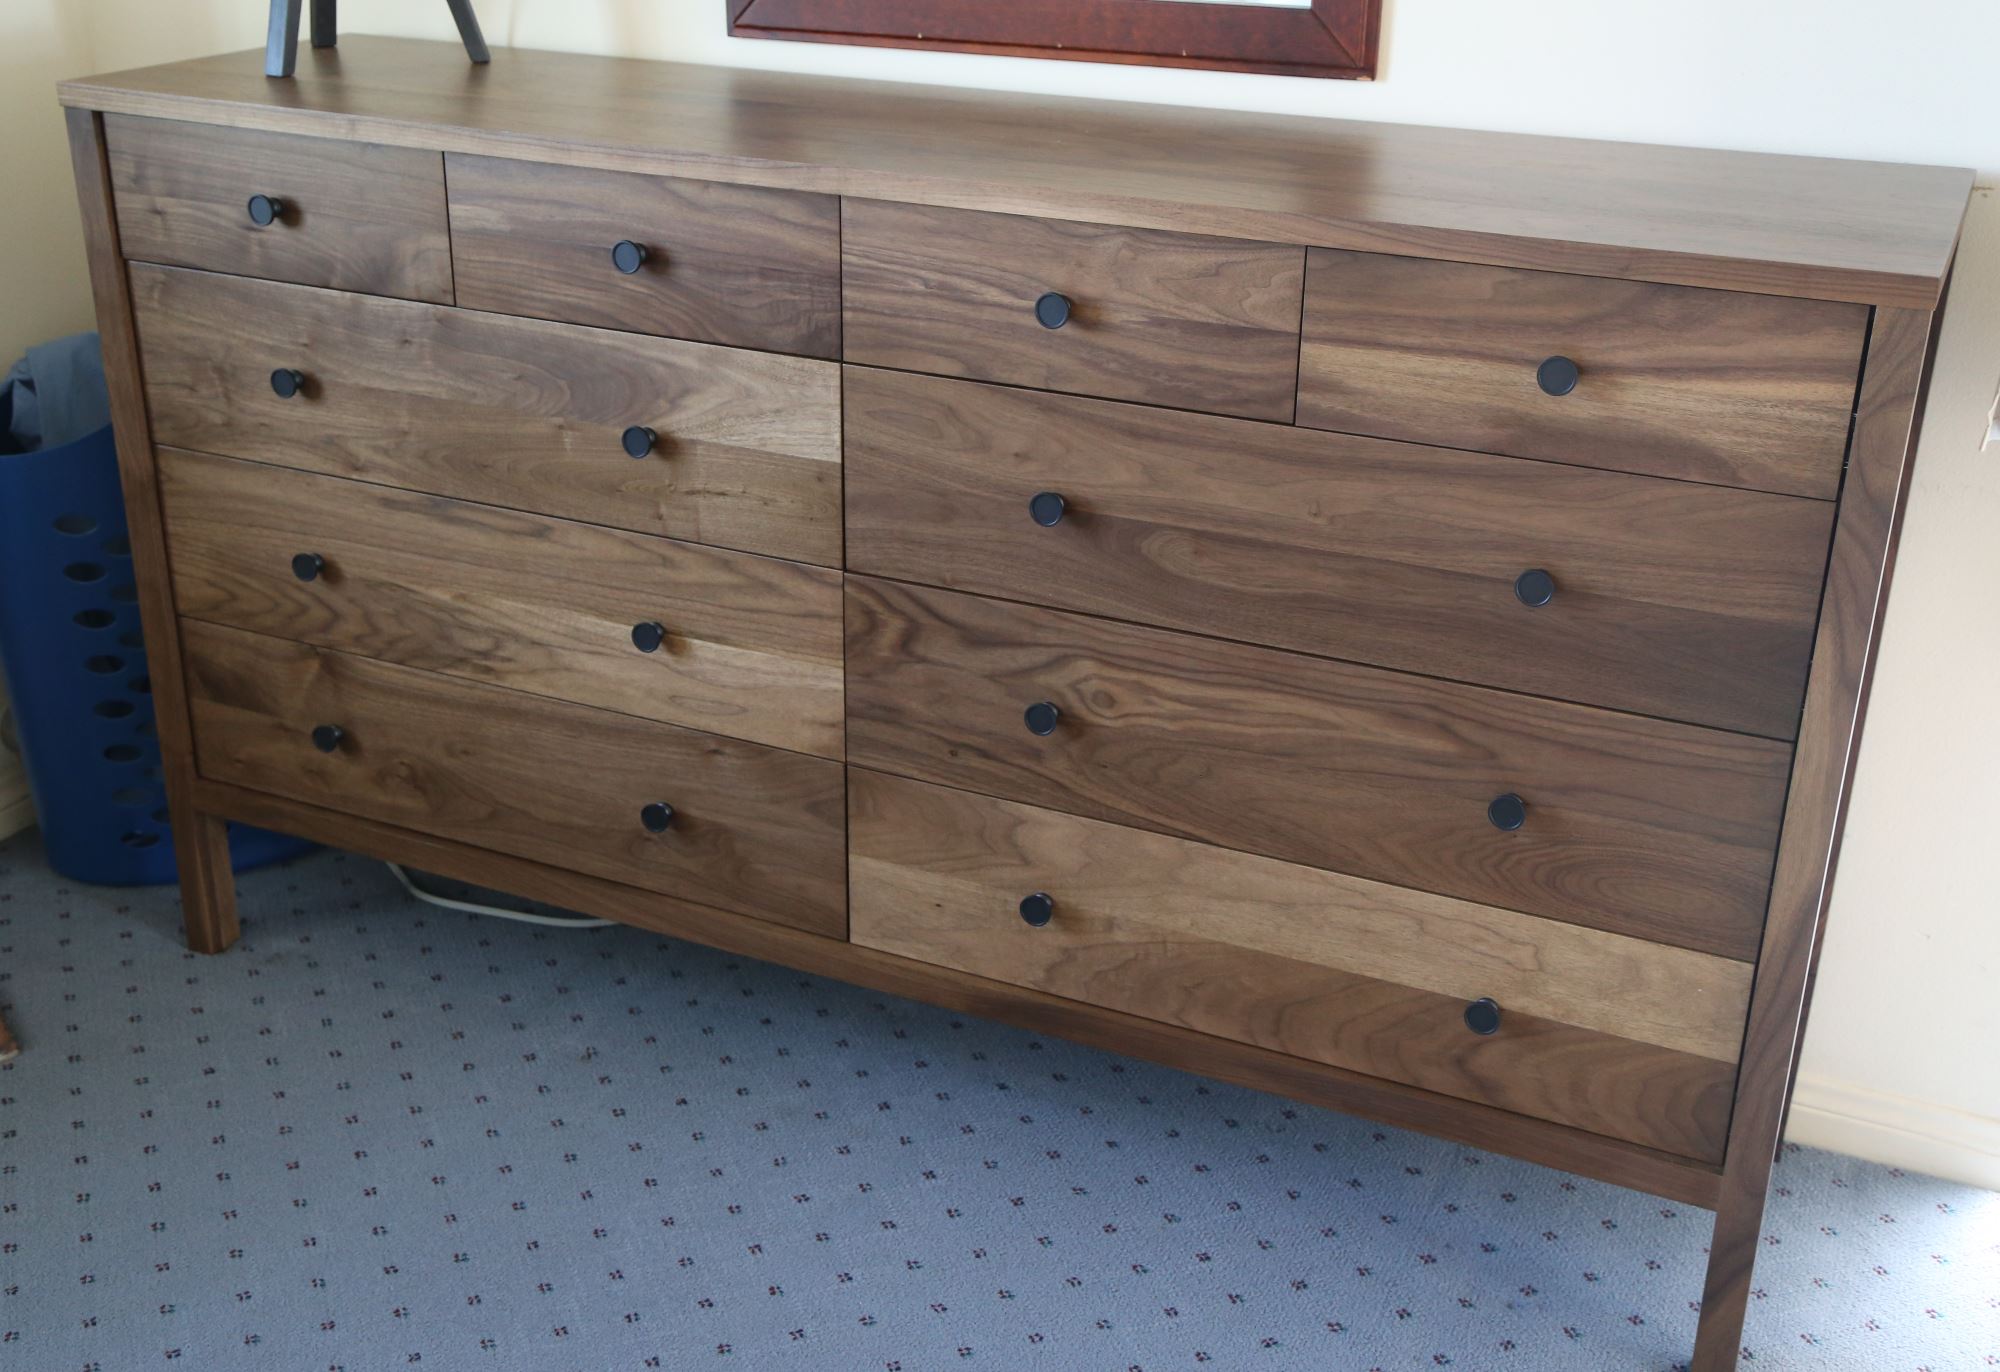 Emerson dresser with knobs replaced